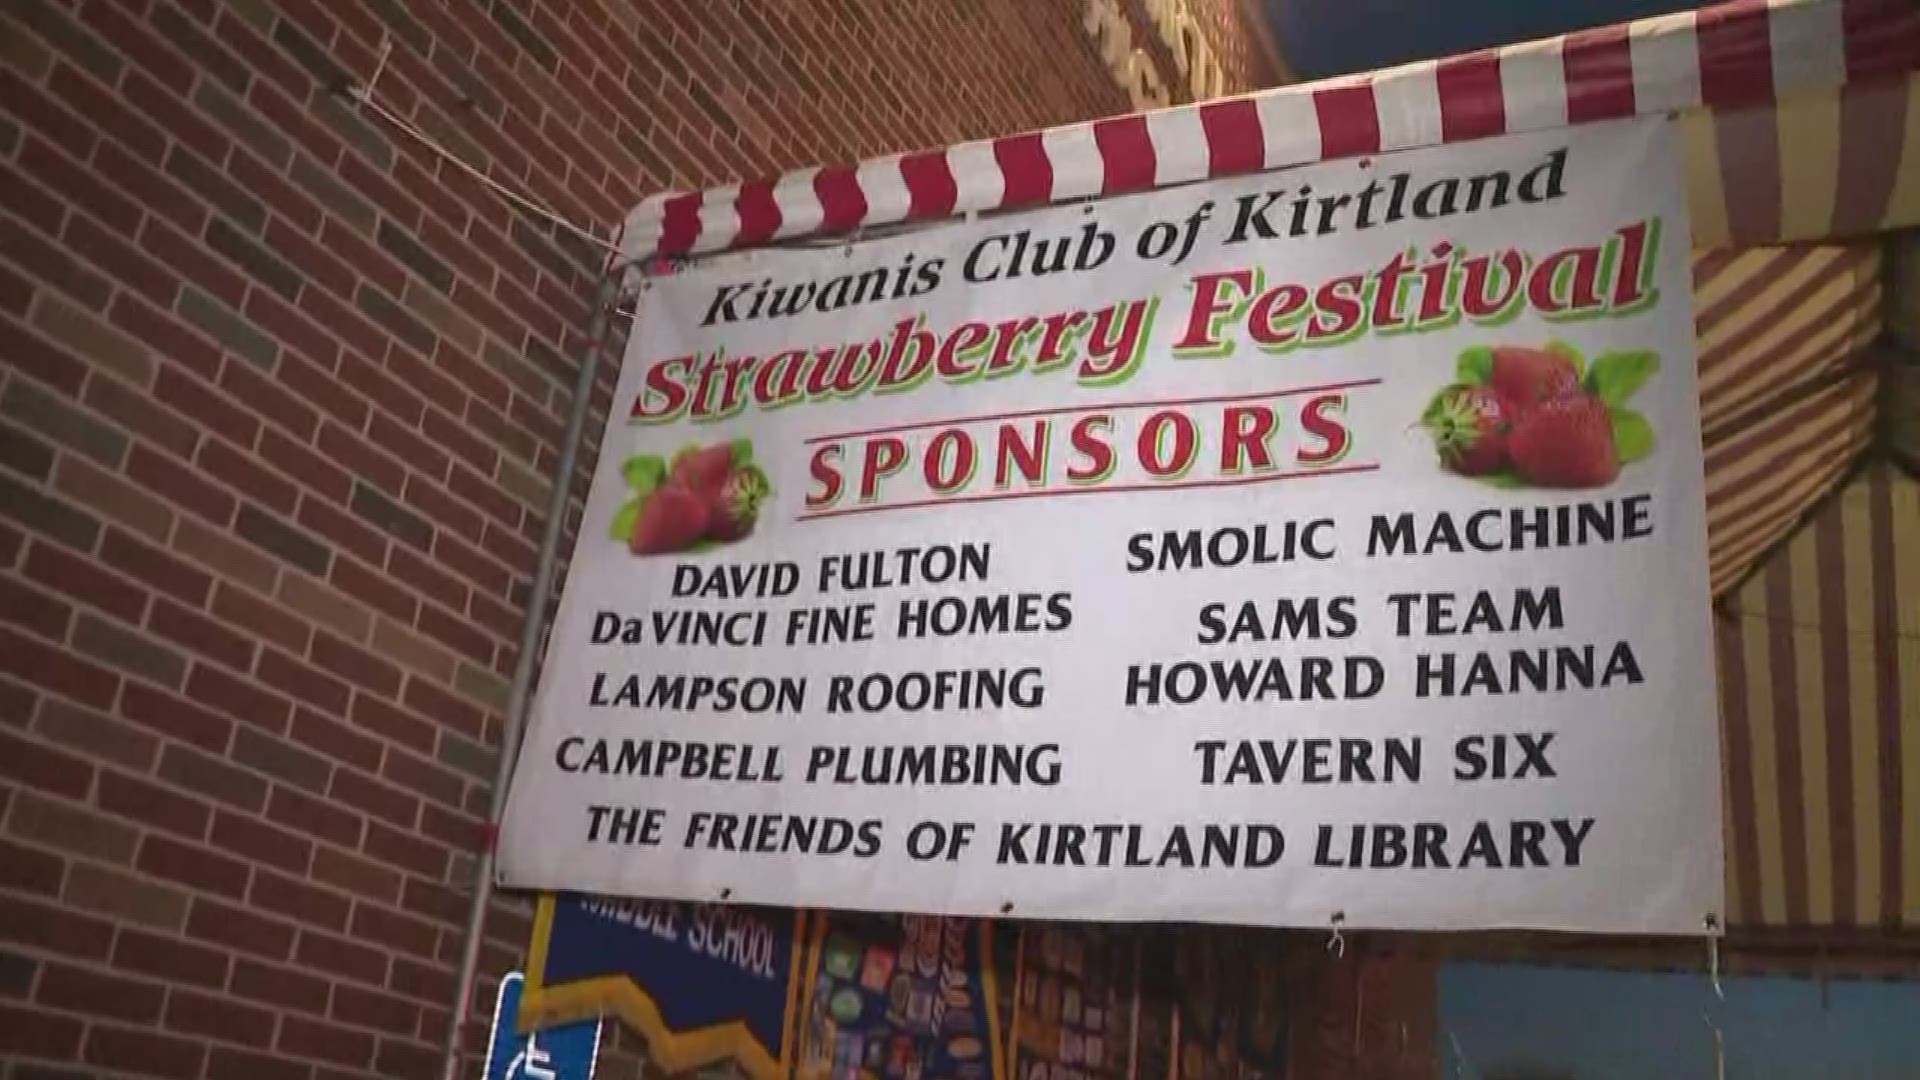 June 14, 2018: The 59th annual Strawberry Festival takes place this weekend in Kirtland. 